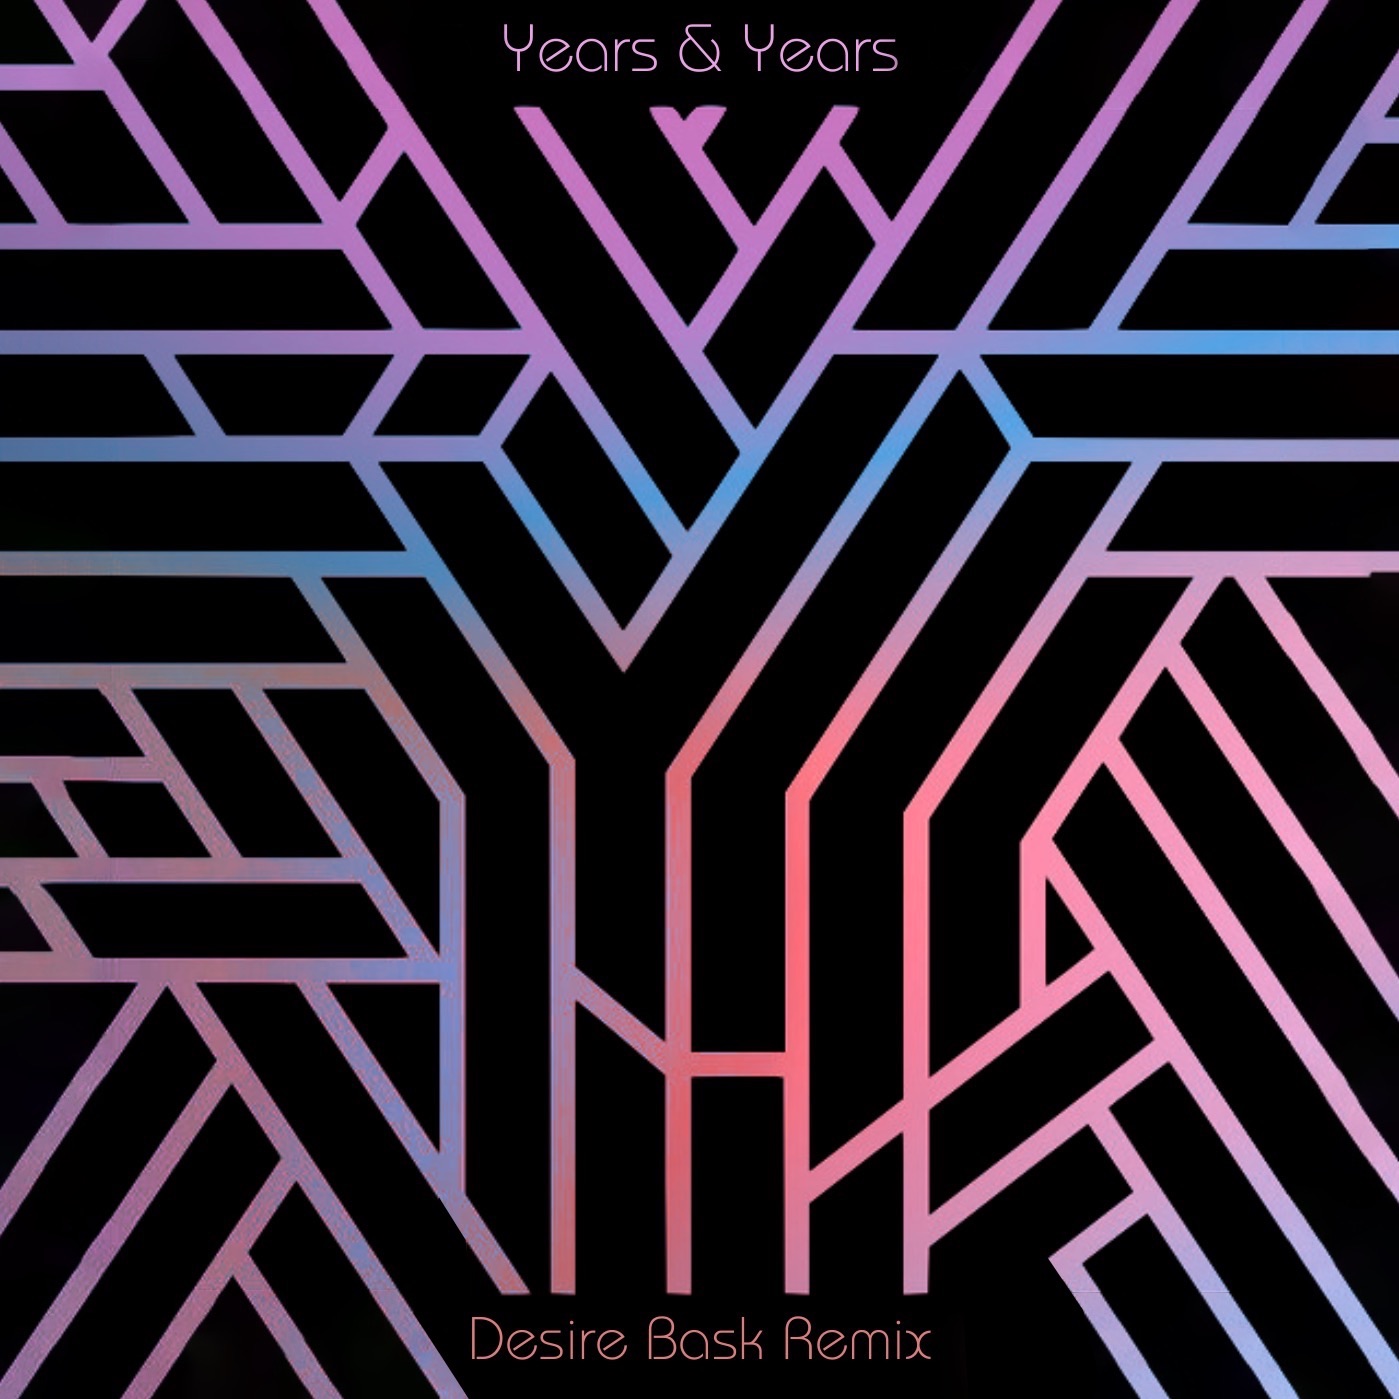 Years & Years – Desire (Bask Edit) [Free Extended DL] *FILTERED DUE TO COPY-RIGHT*